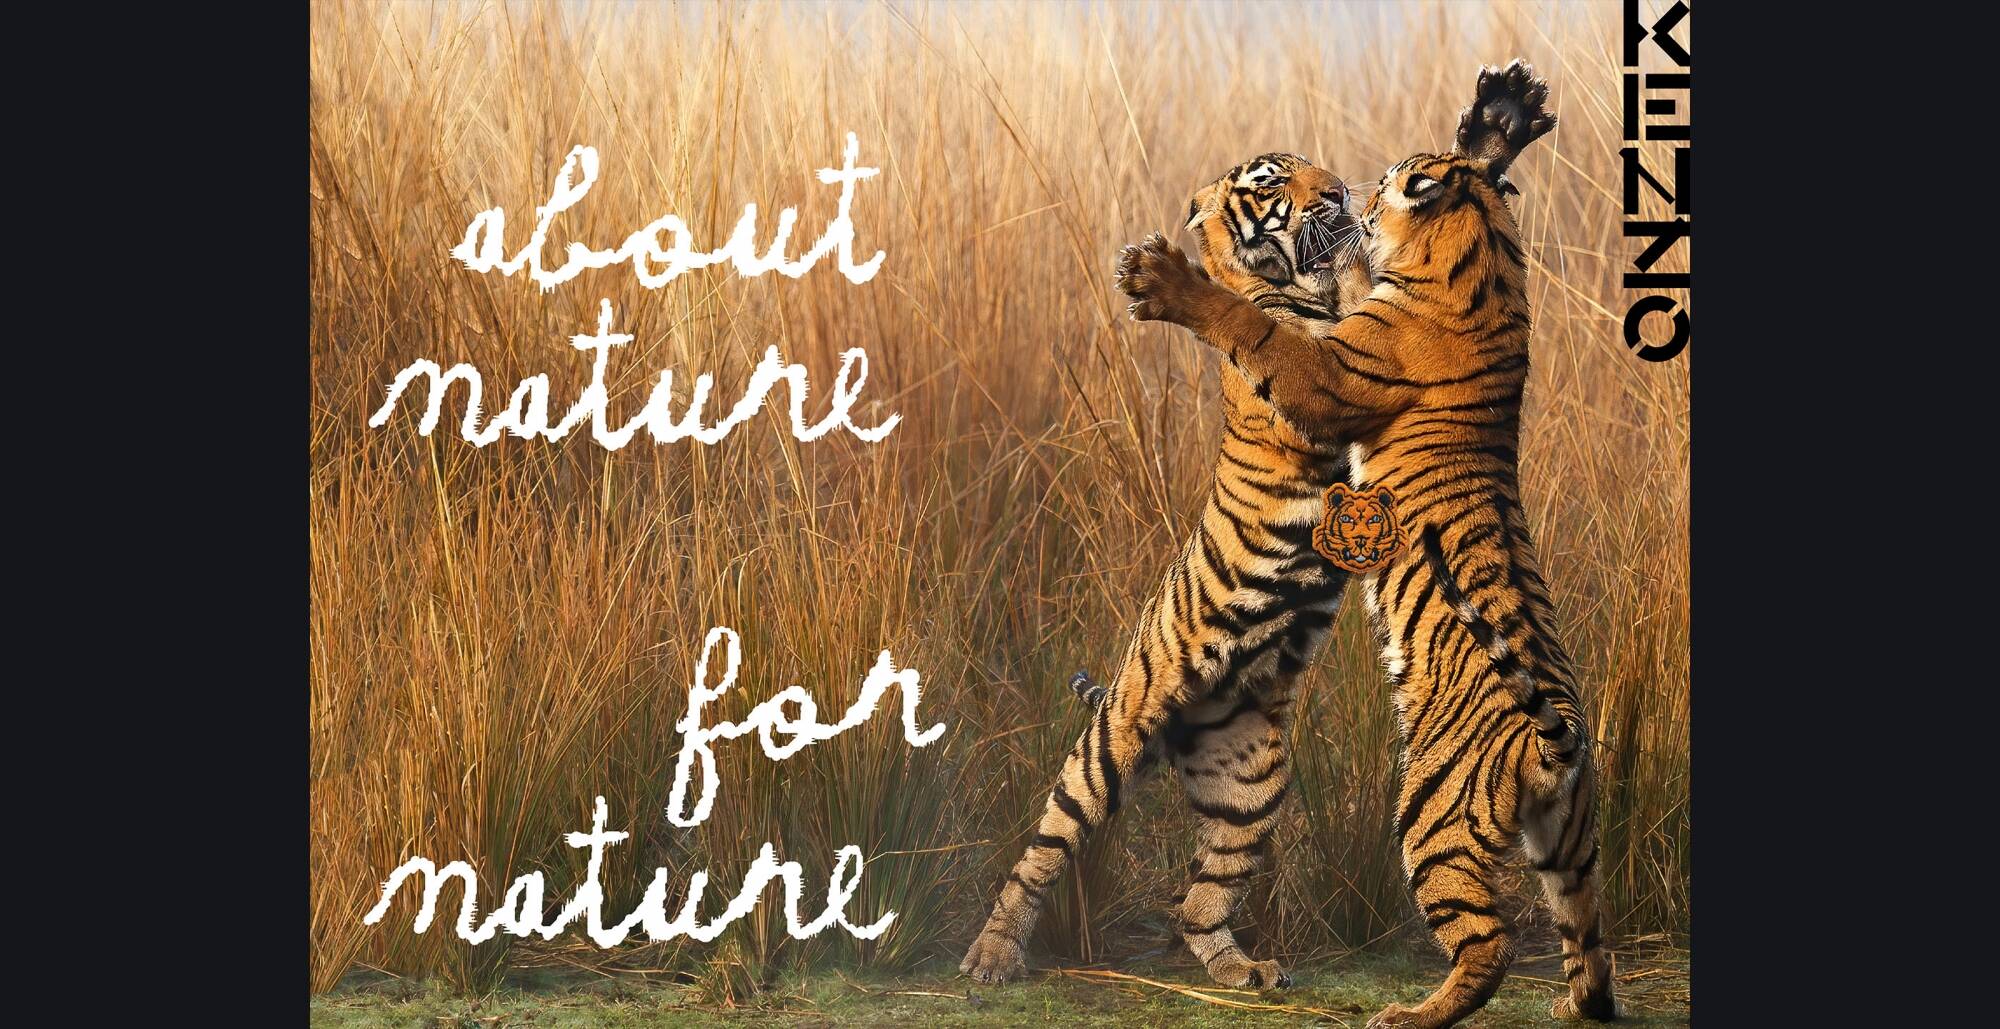 Kenzo partners with World Wide Fund for Nature (WWF) to protect wild tigers  and double their numbers by 2022 - LVMH